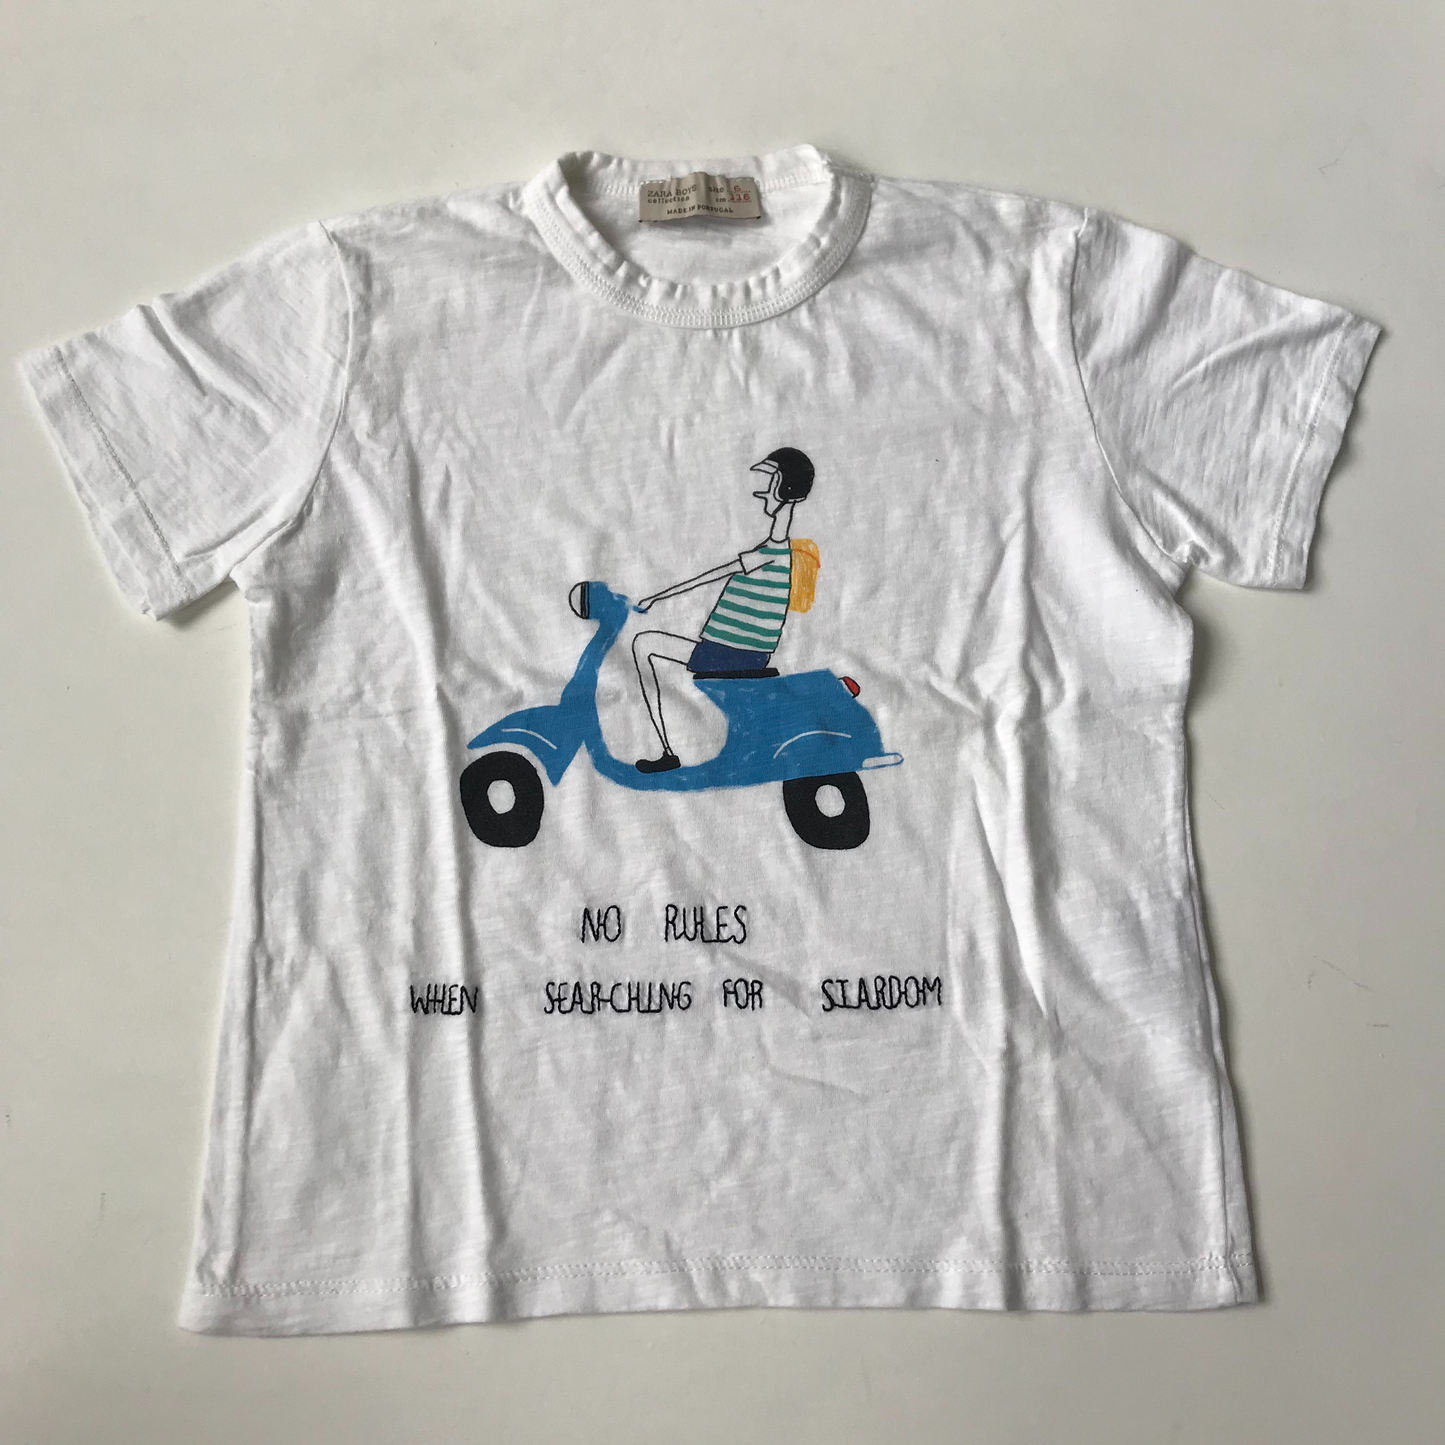 T-shirt - 'No Rules When Searching for Stardom' - Age 6